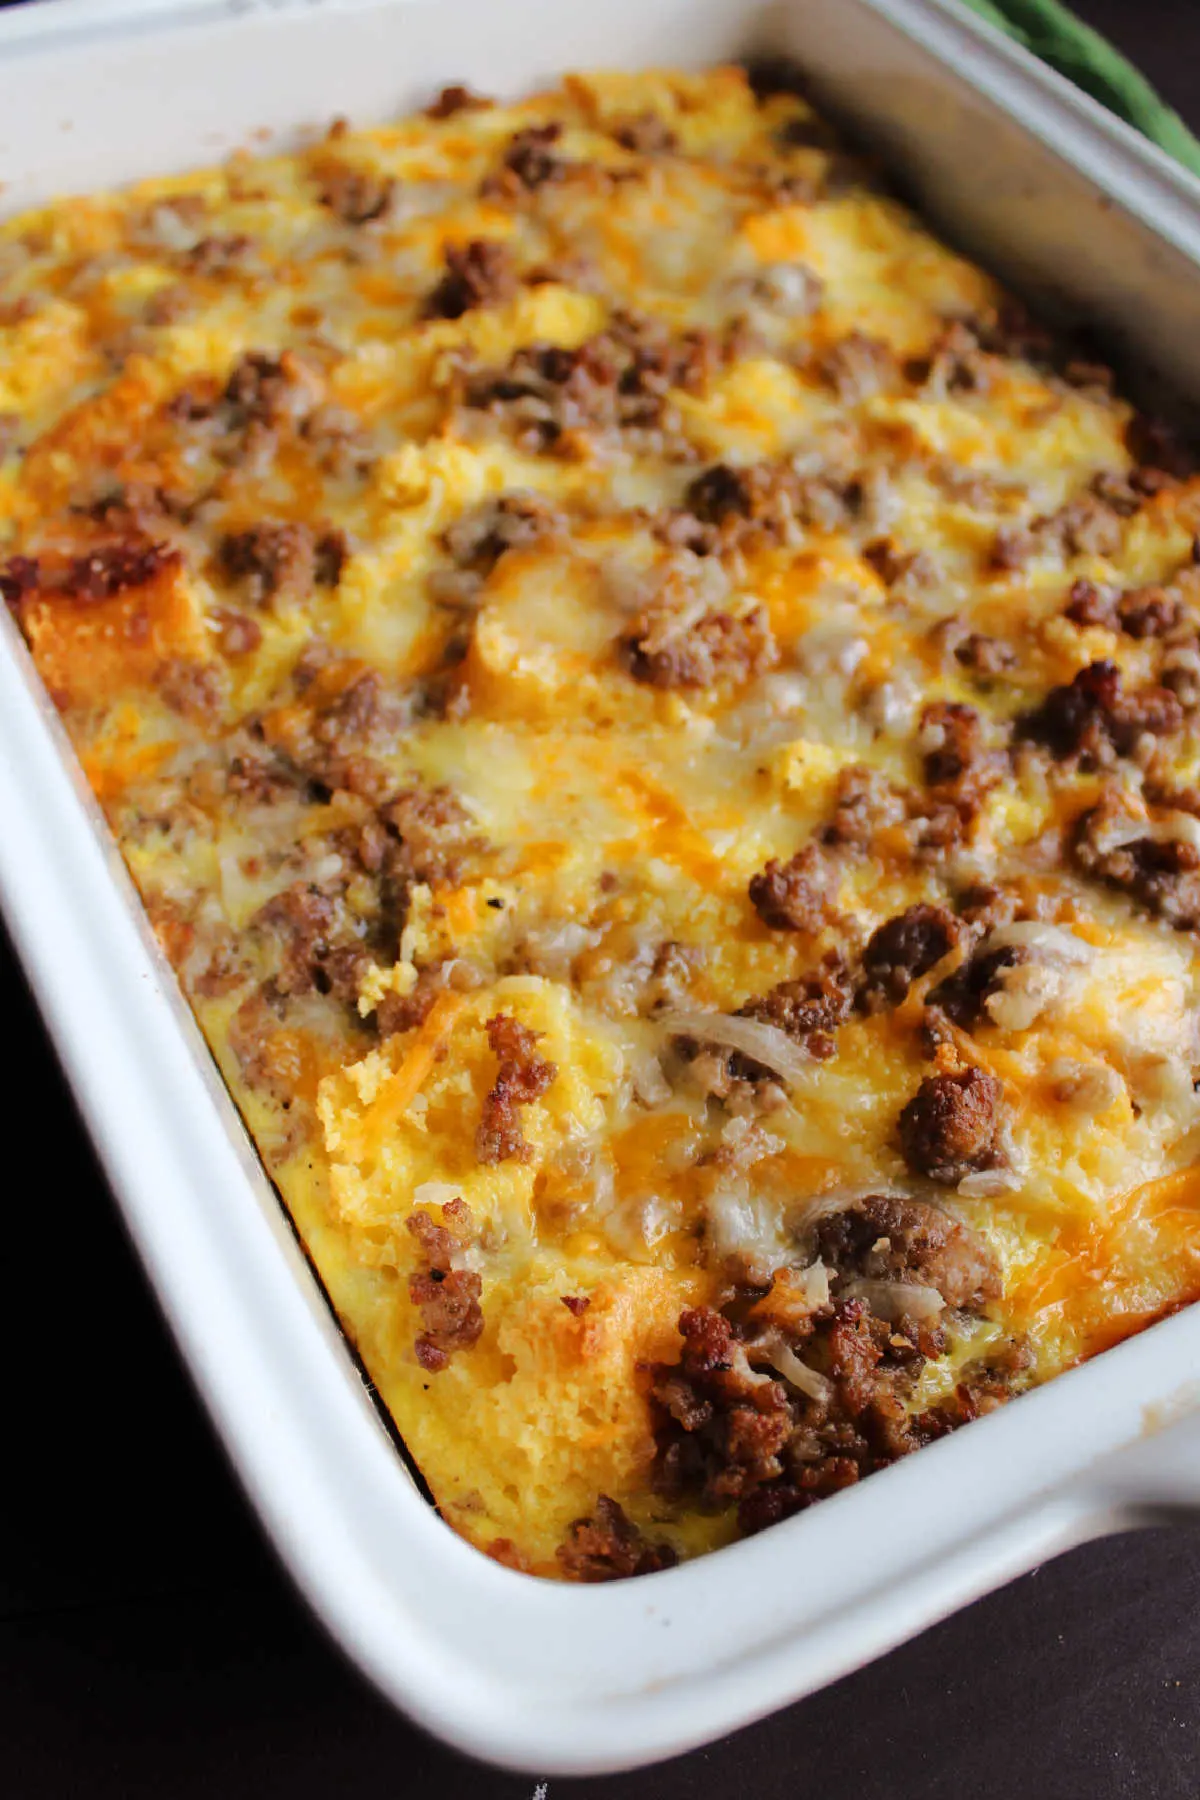 Freshly baked egg casserole with chunks of sausage and melted cheddar cheese on top.